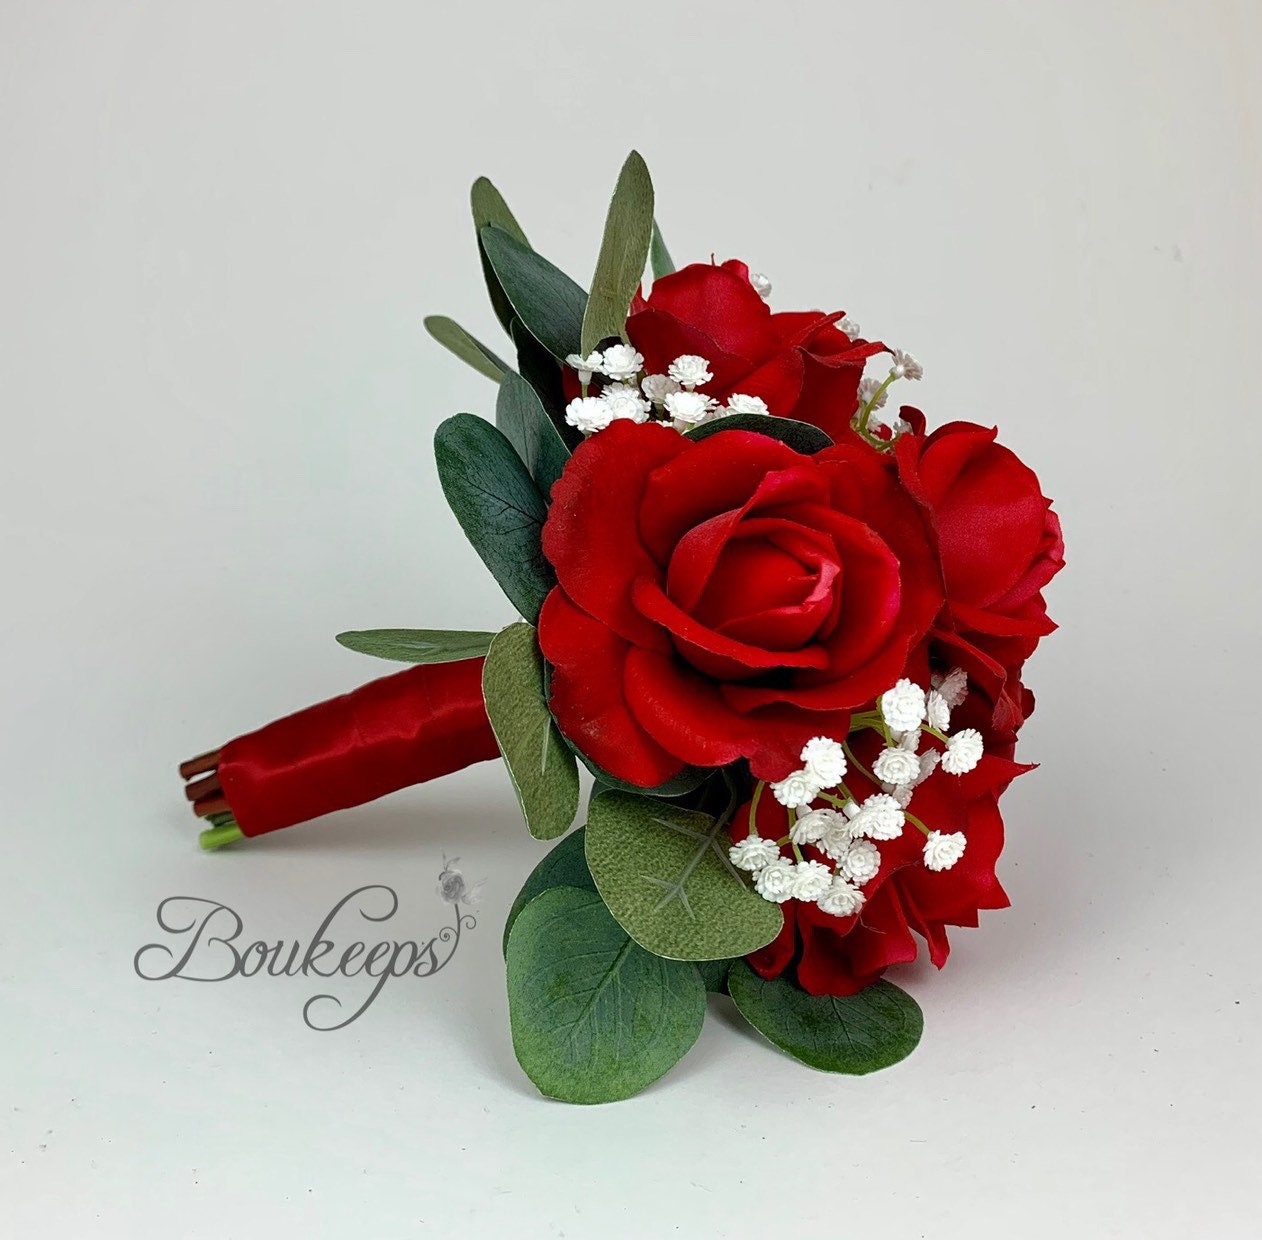 red rose bridal bouquet with diamond head pins,white ribbon and babies  breath.